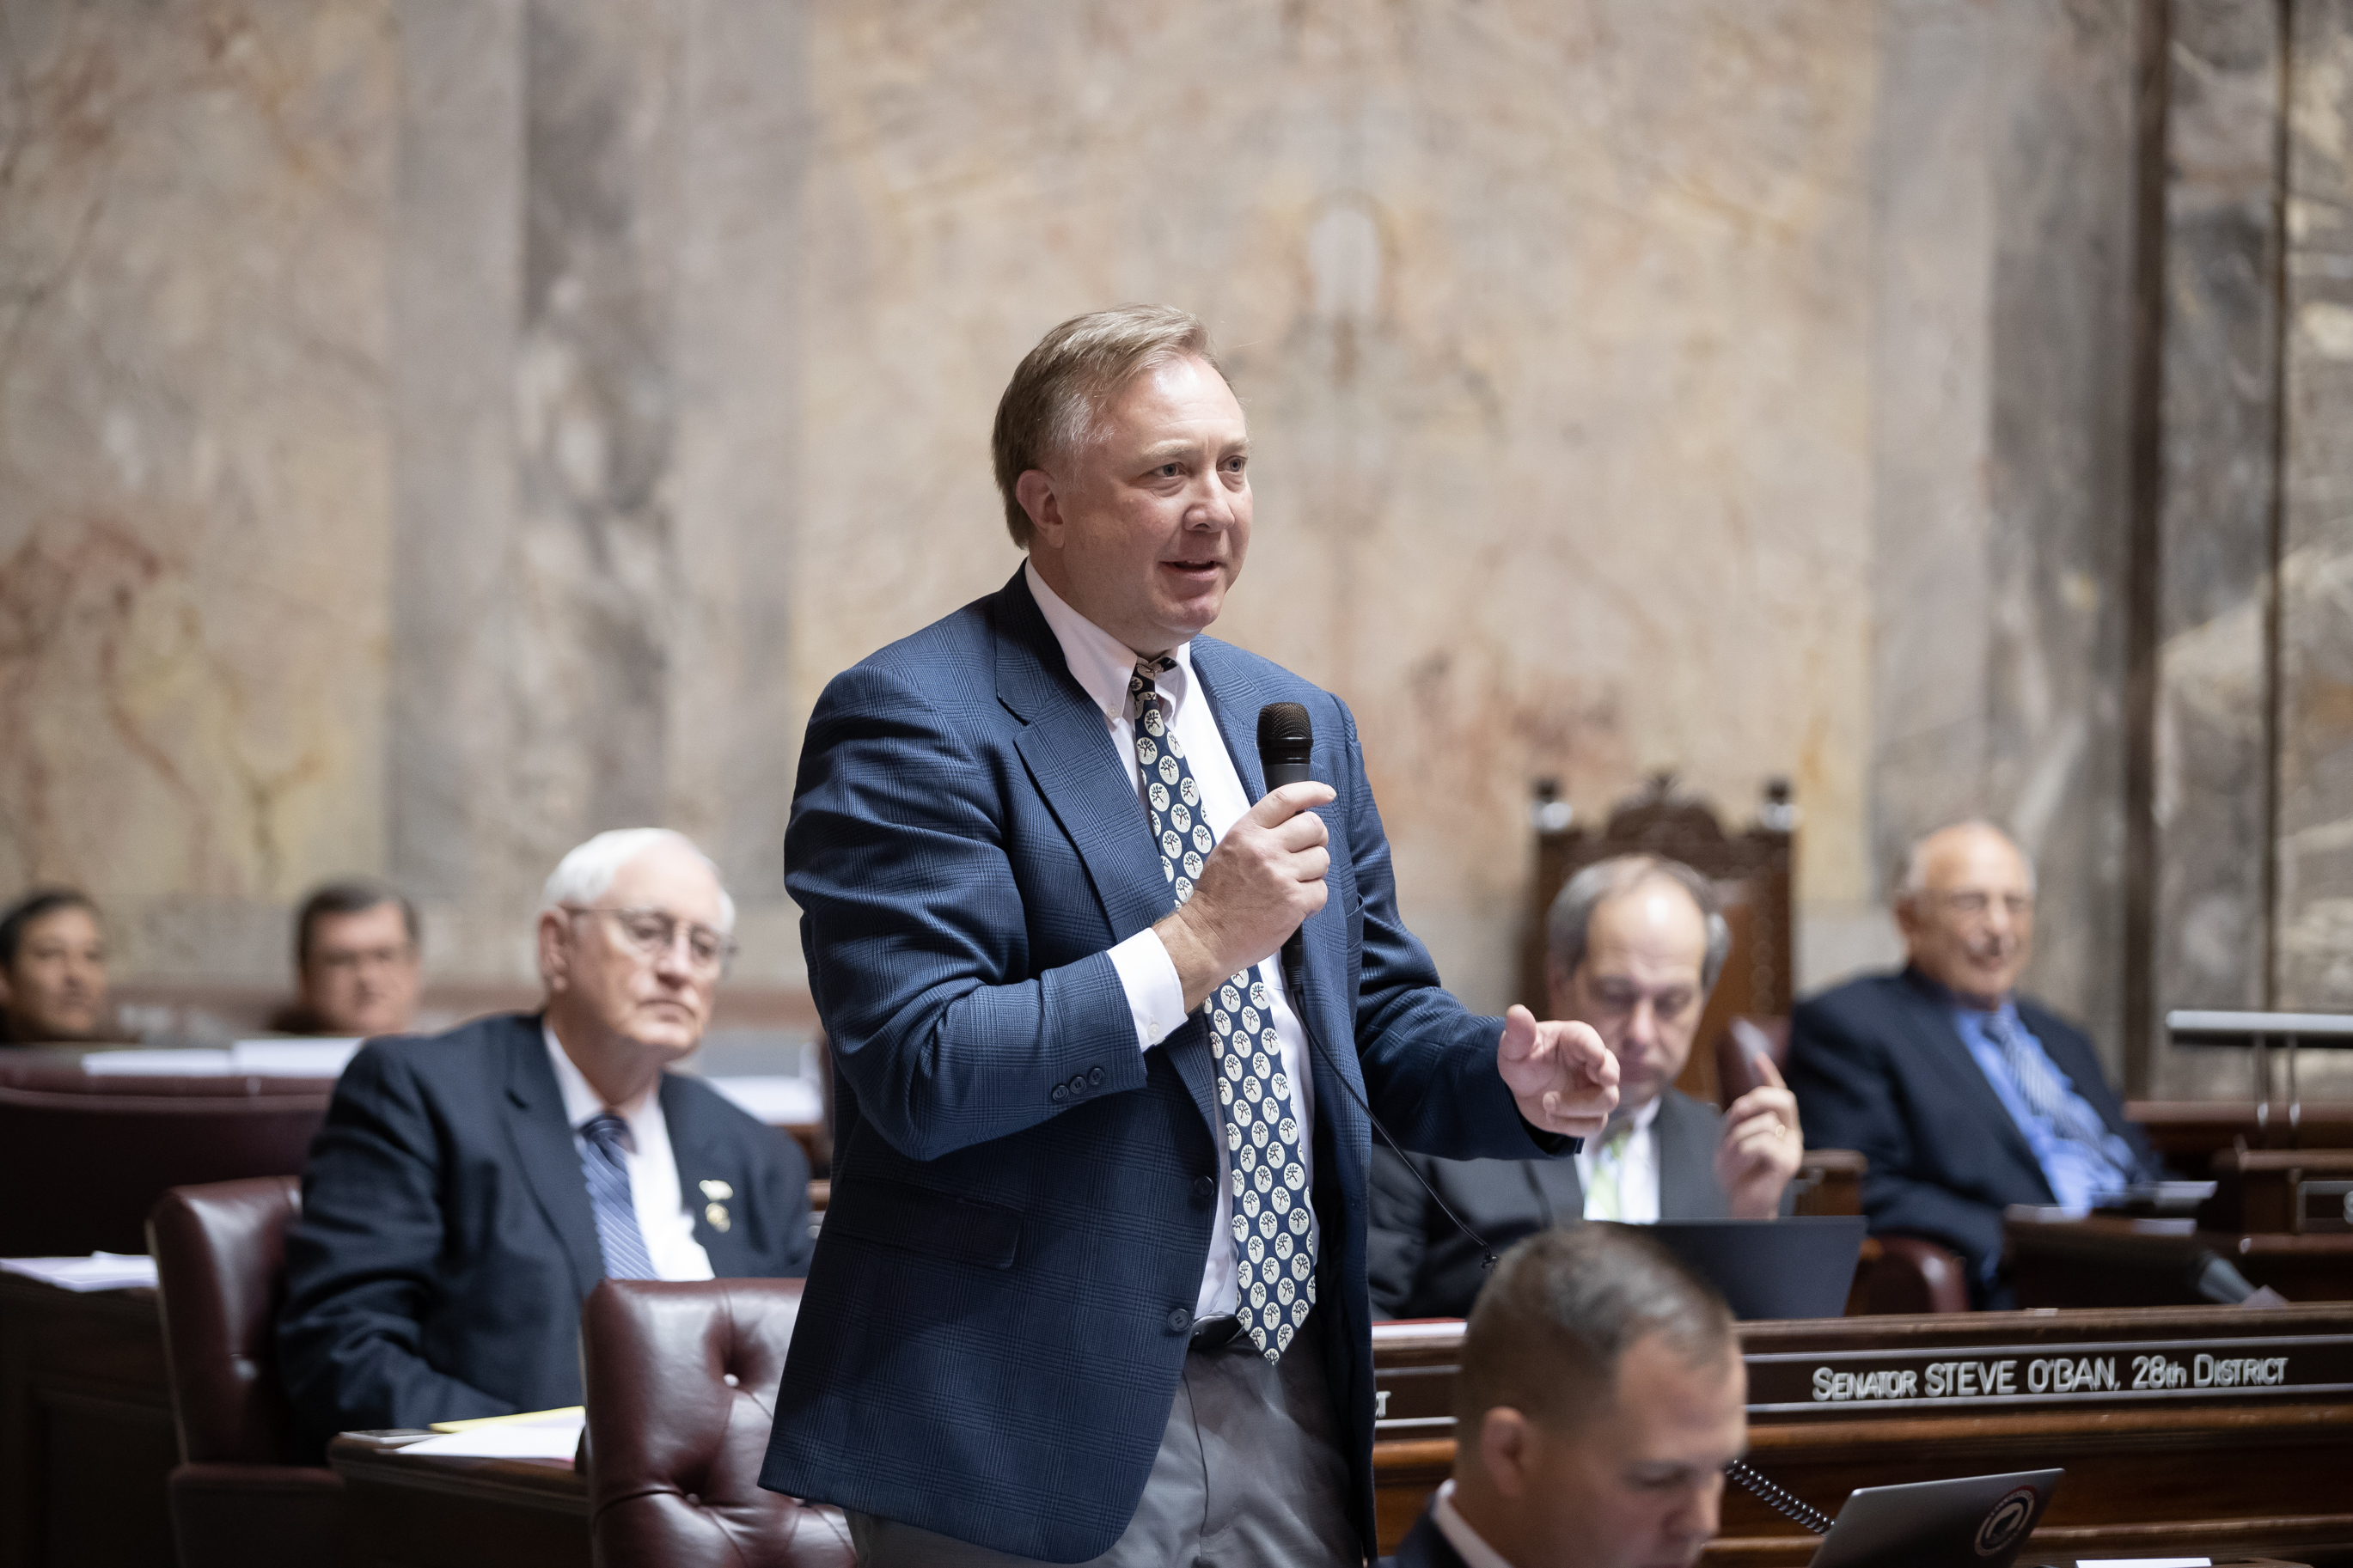 One State Senator says it seems like Democrats in the legislature are trying to drive oil refineries out of our state. Senator Doug Ericksen says a new proposal could cost taxpayers upwards of a billion dollars.